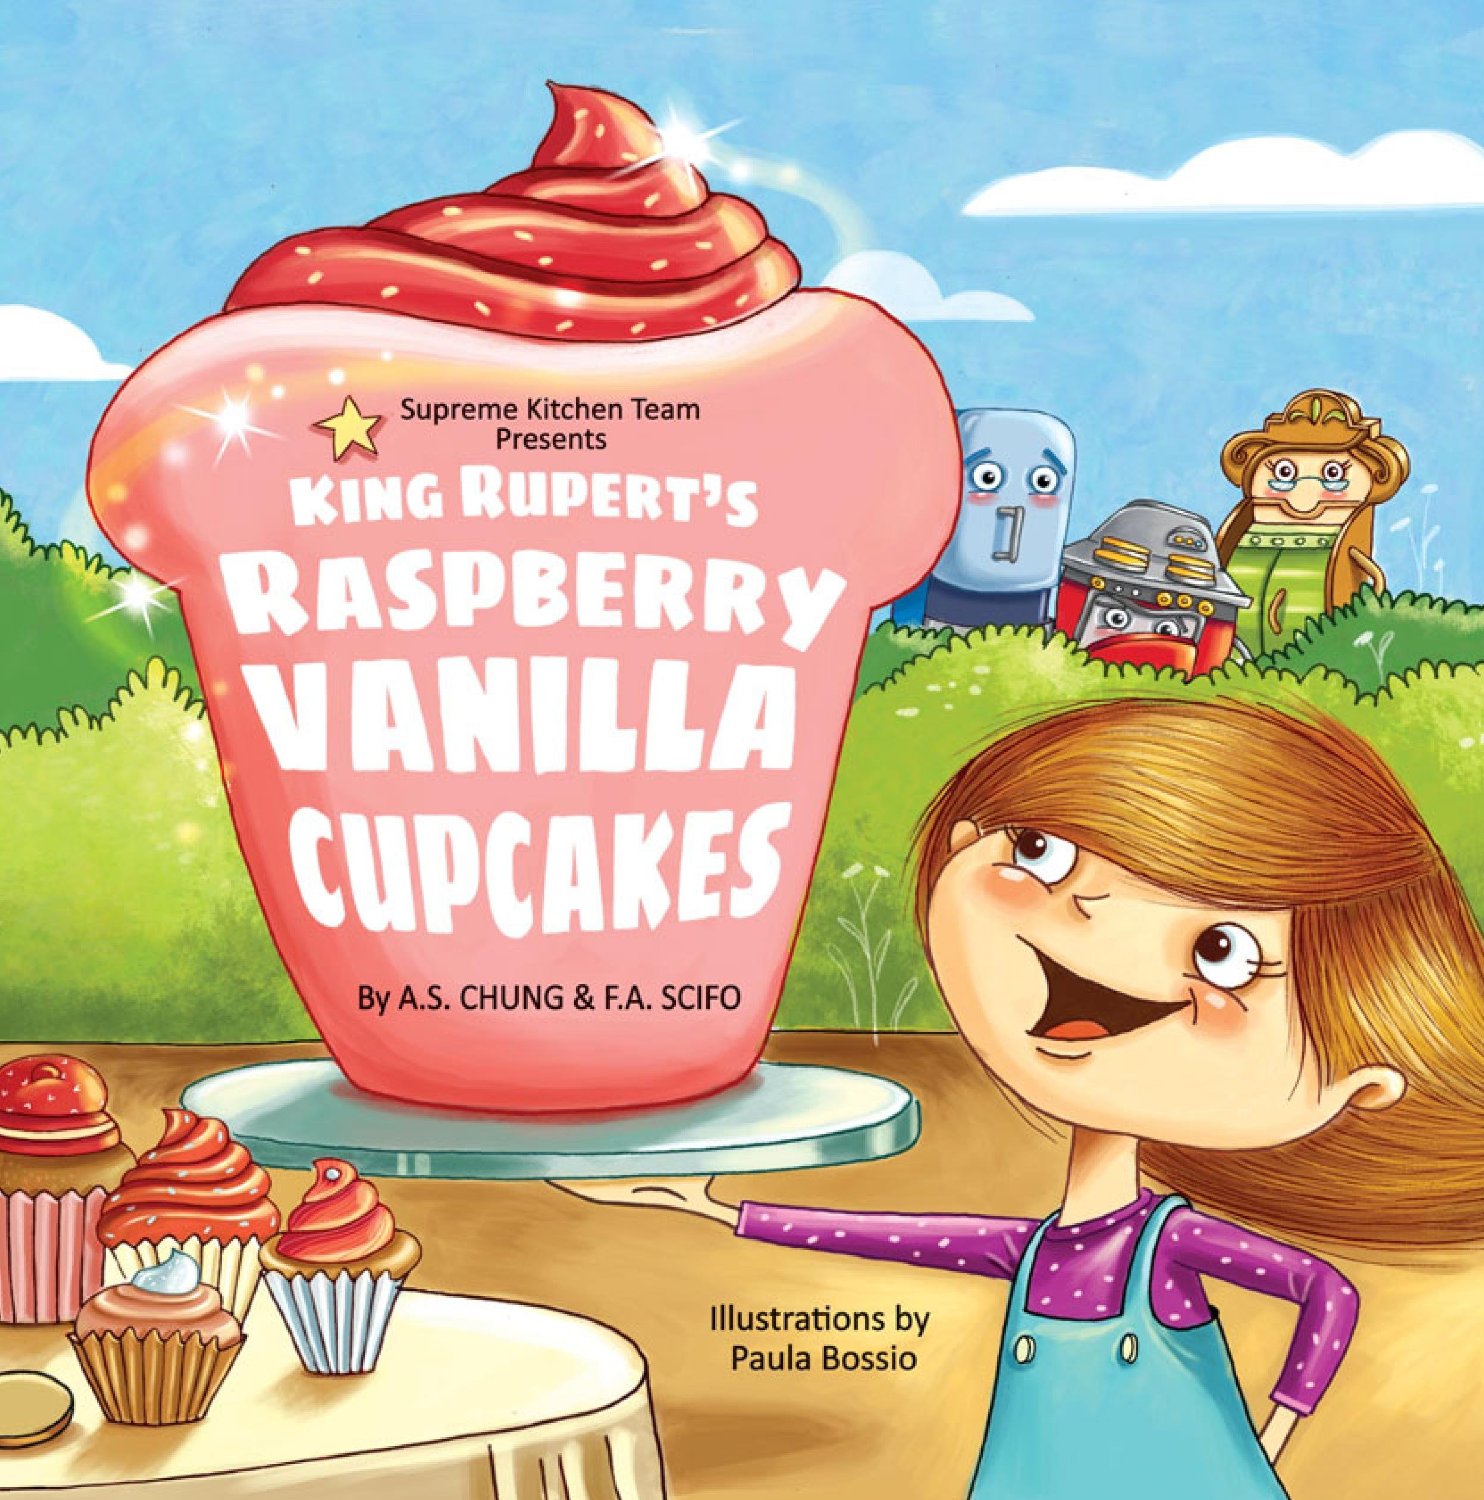 Supreme Kitchen Team – King Rupert’s Raspberry Vanilla Cupcakes by A.S Chung & F.A.Scifo